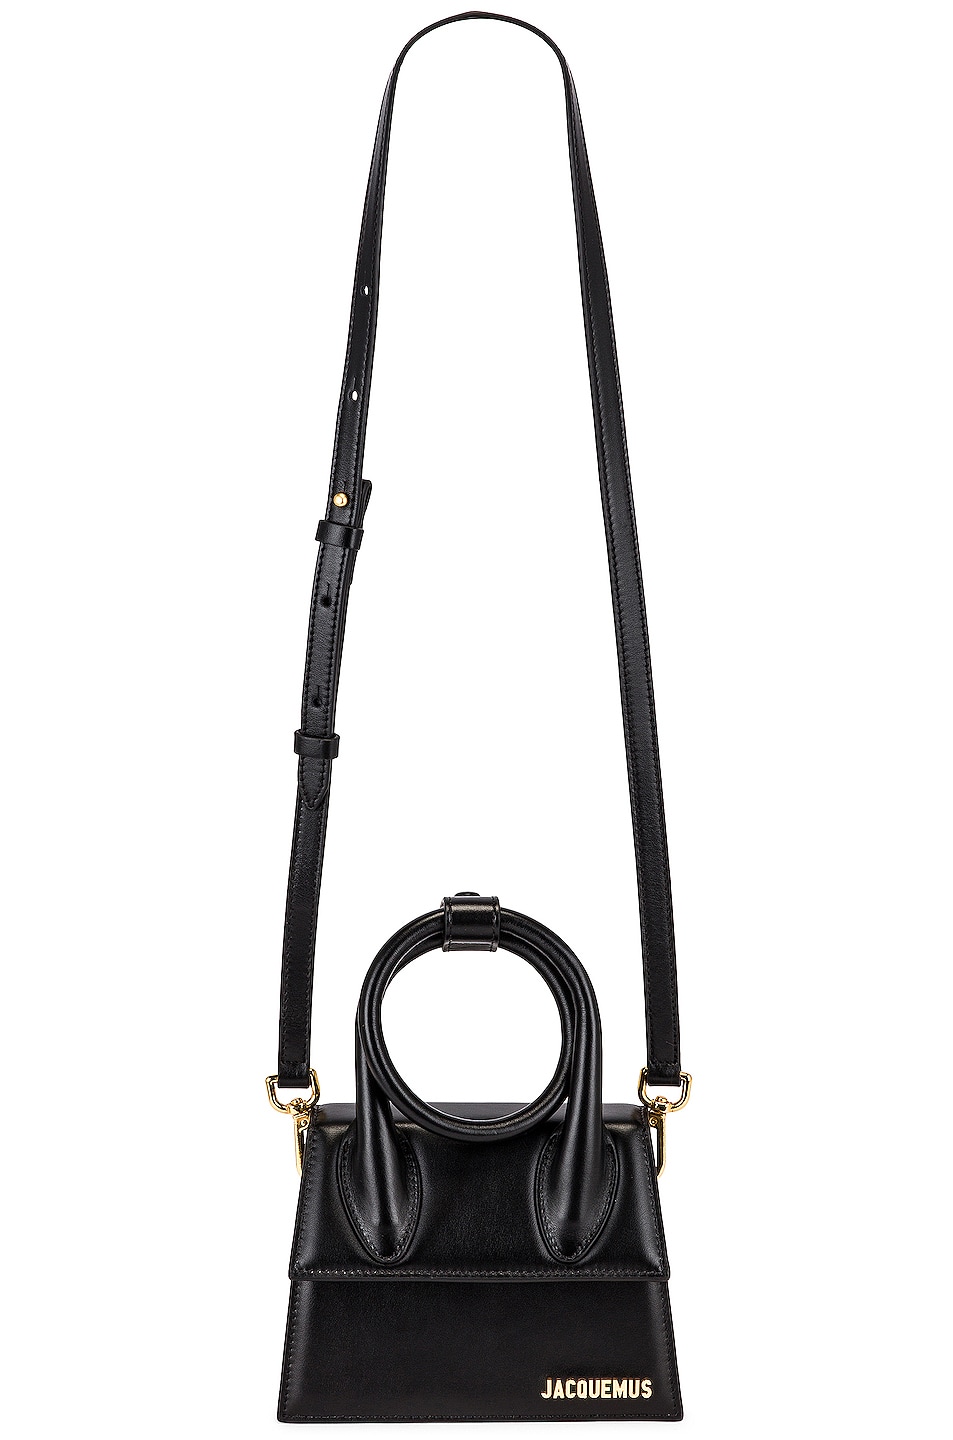 Le Chiquito Noeud Bag in Black